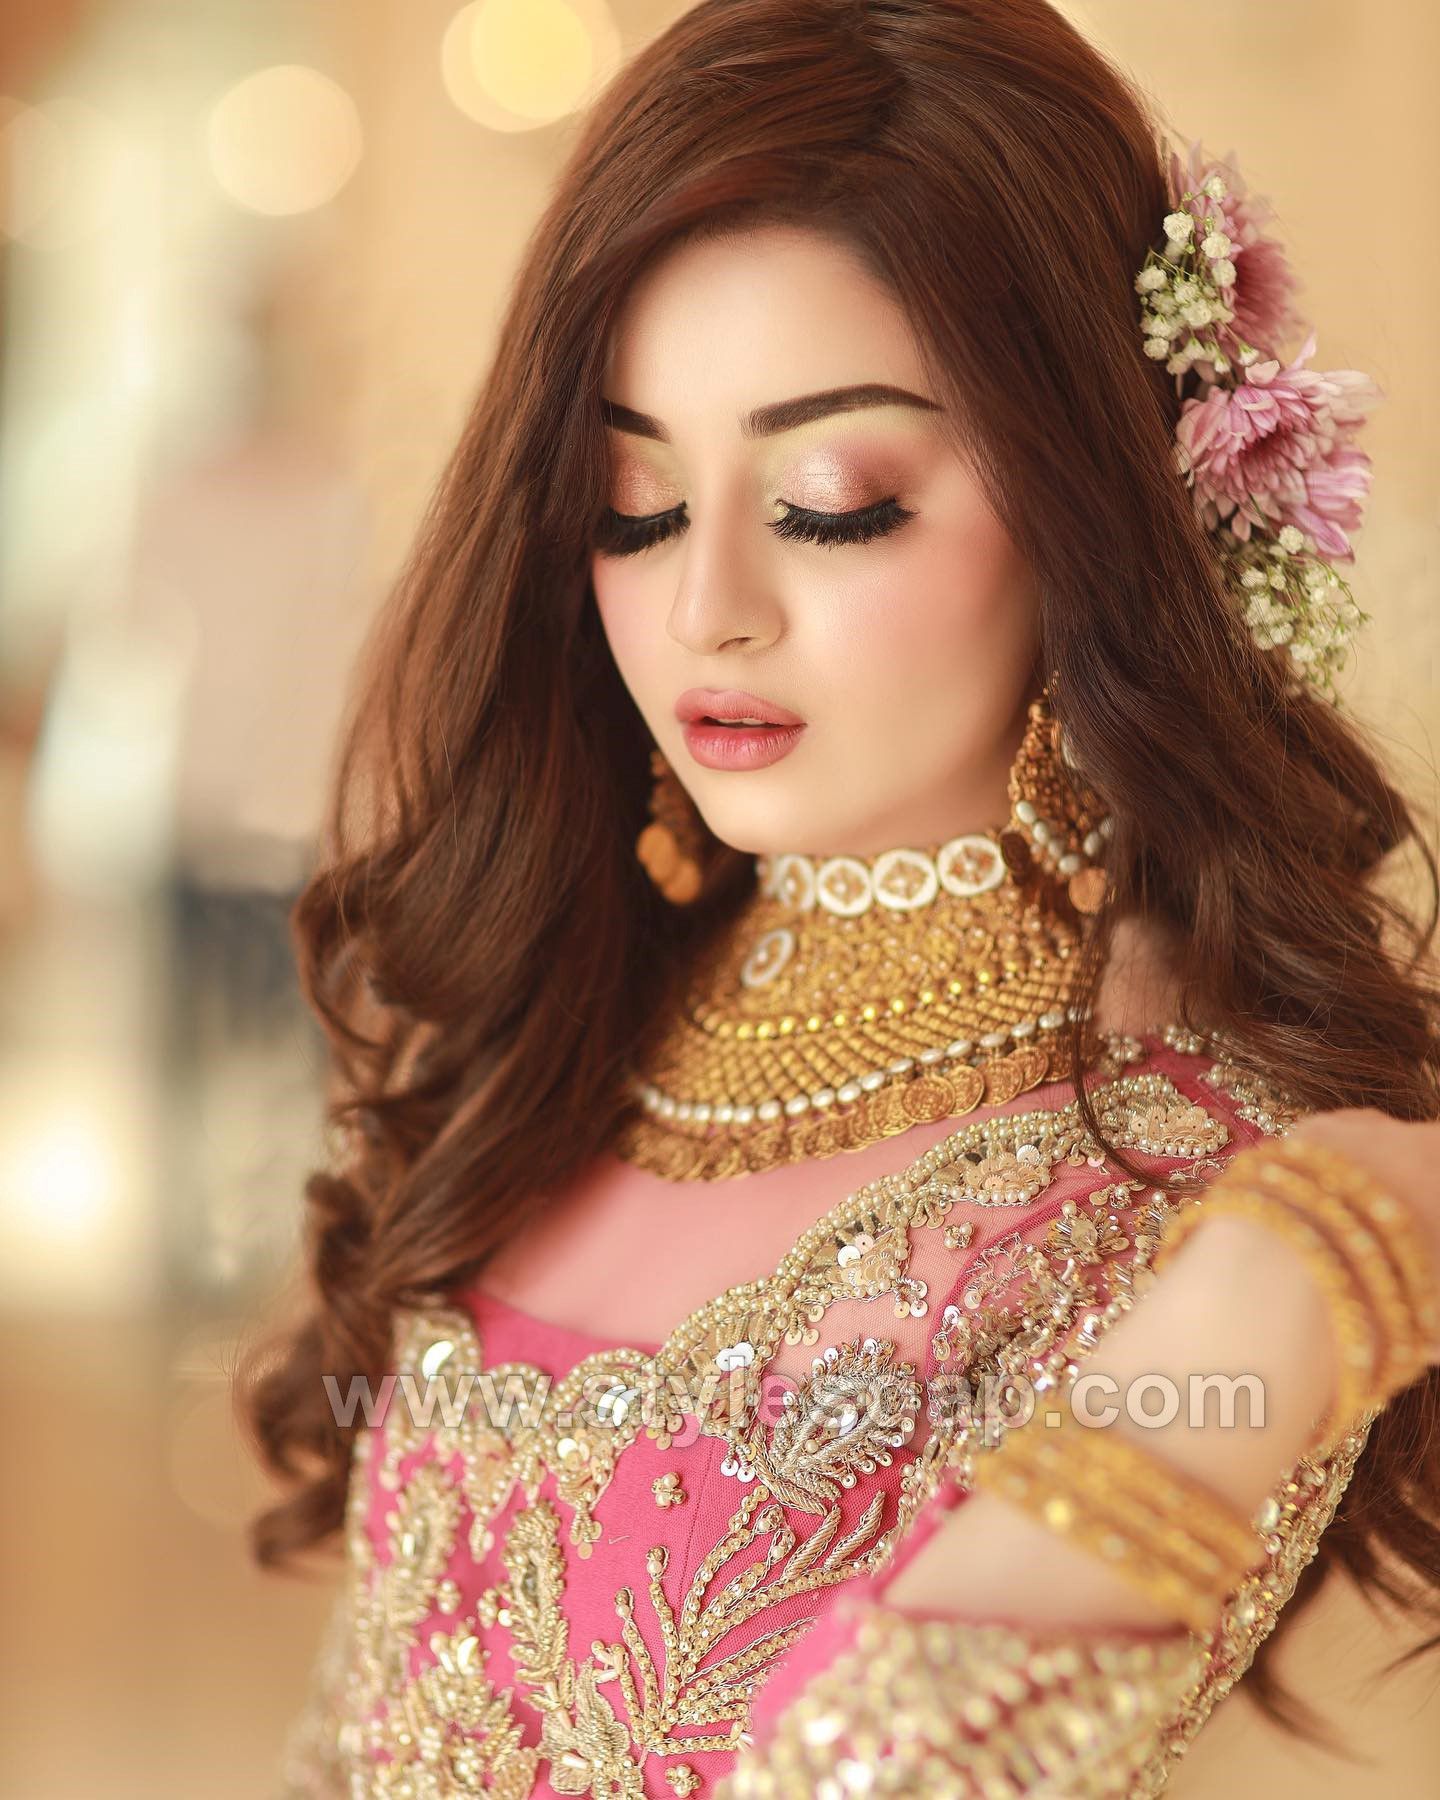 💕REALBRIDE💕Walima #bridal #hair by #coshimakeup 💖 glowy… | Flickr